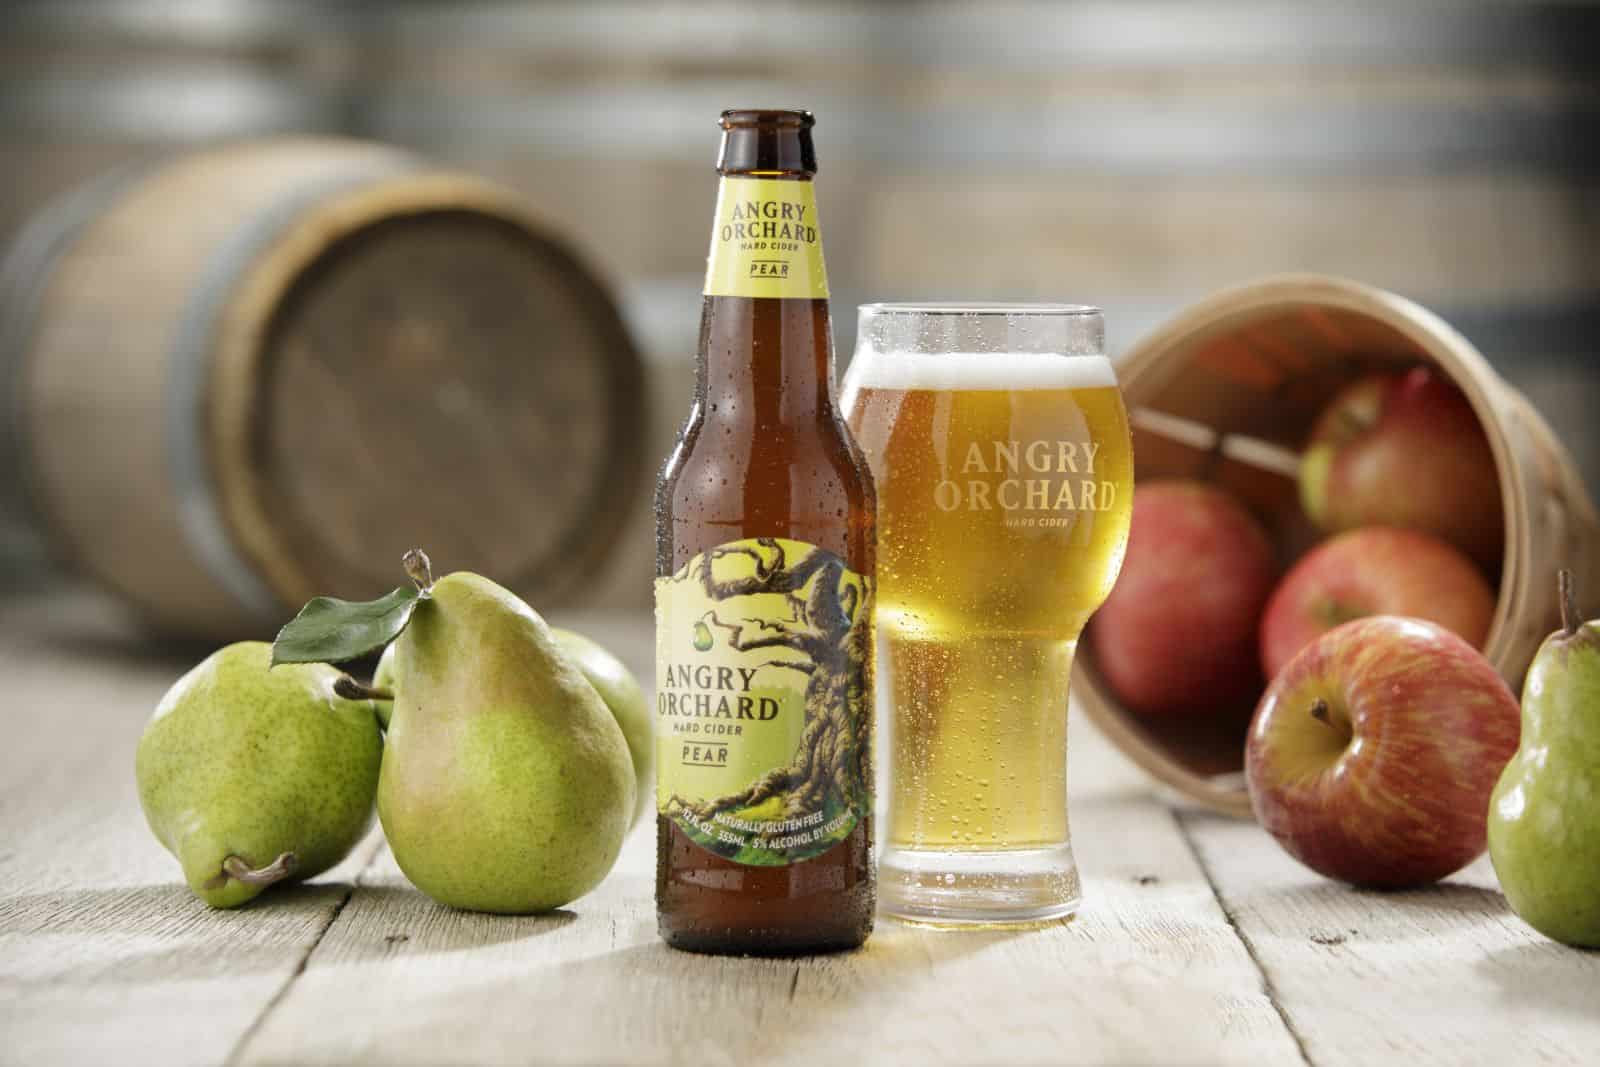 Angry Orchard Pear Cider